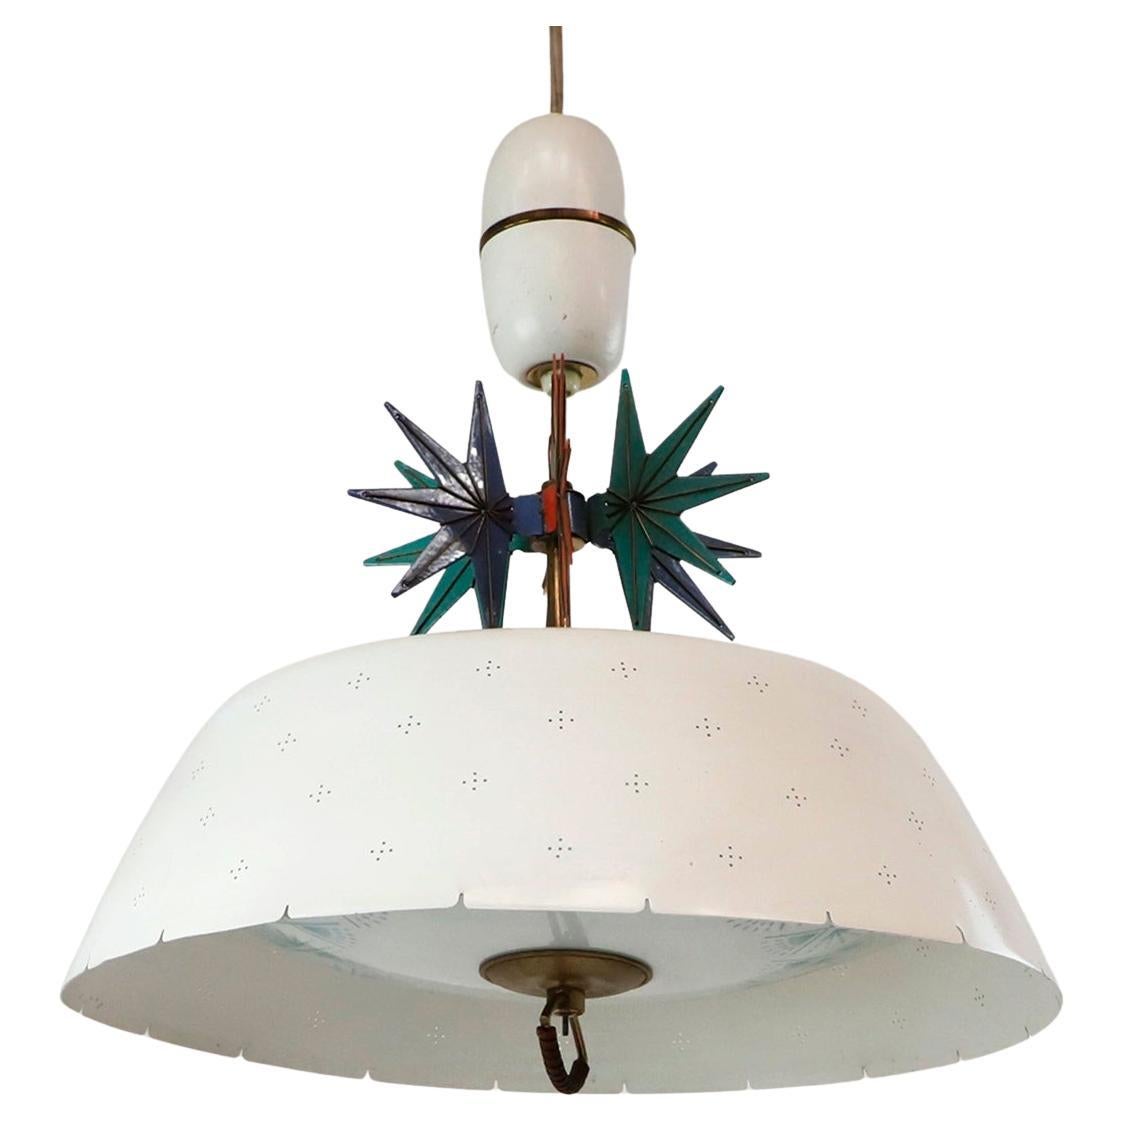 1950s Atomic Pendant Lamp Perforated with Enamel Details